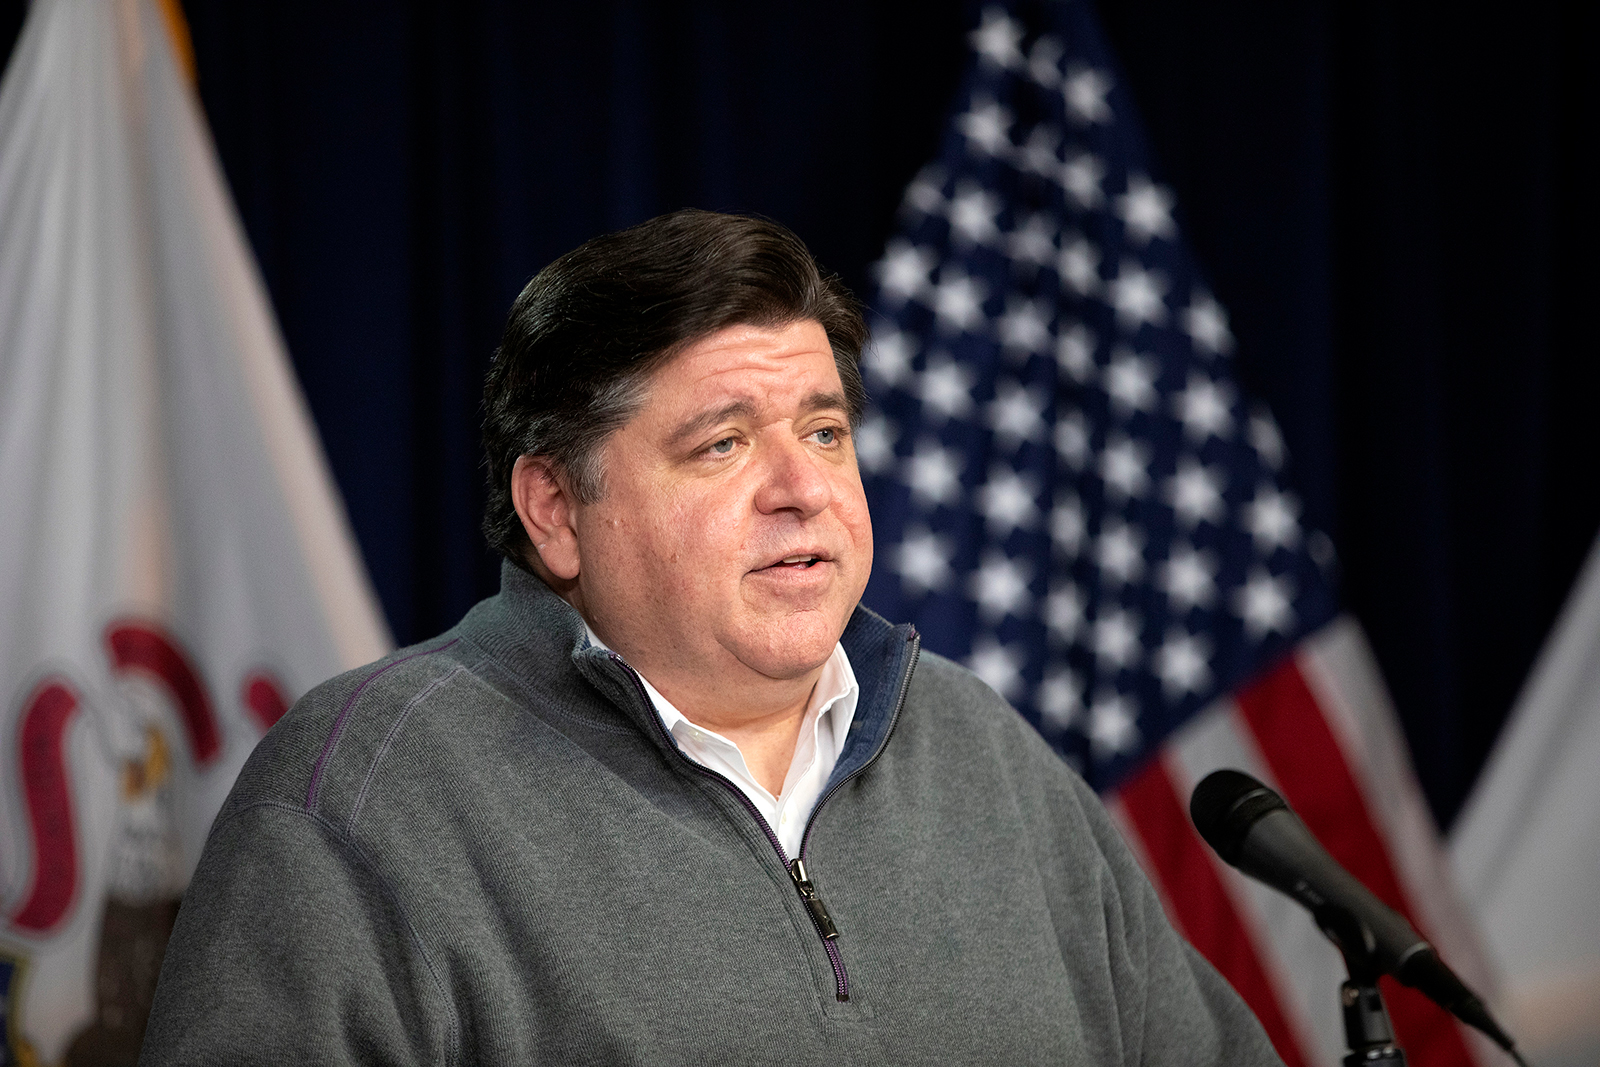 Illinois Gov. J.B. Pritzker speaks during the daily press briefing regarding the coronavirus pandemic at the James R. Thompson Center in Chicago on Sunday, May 3.